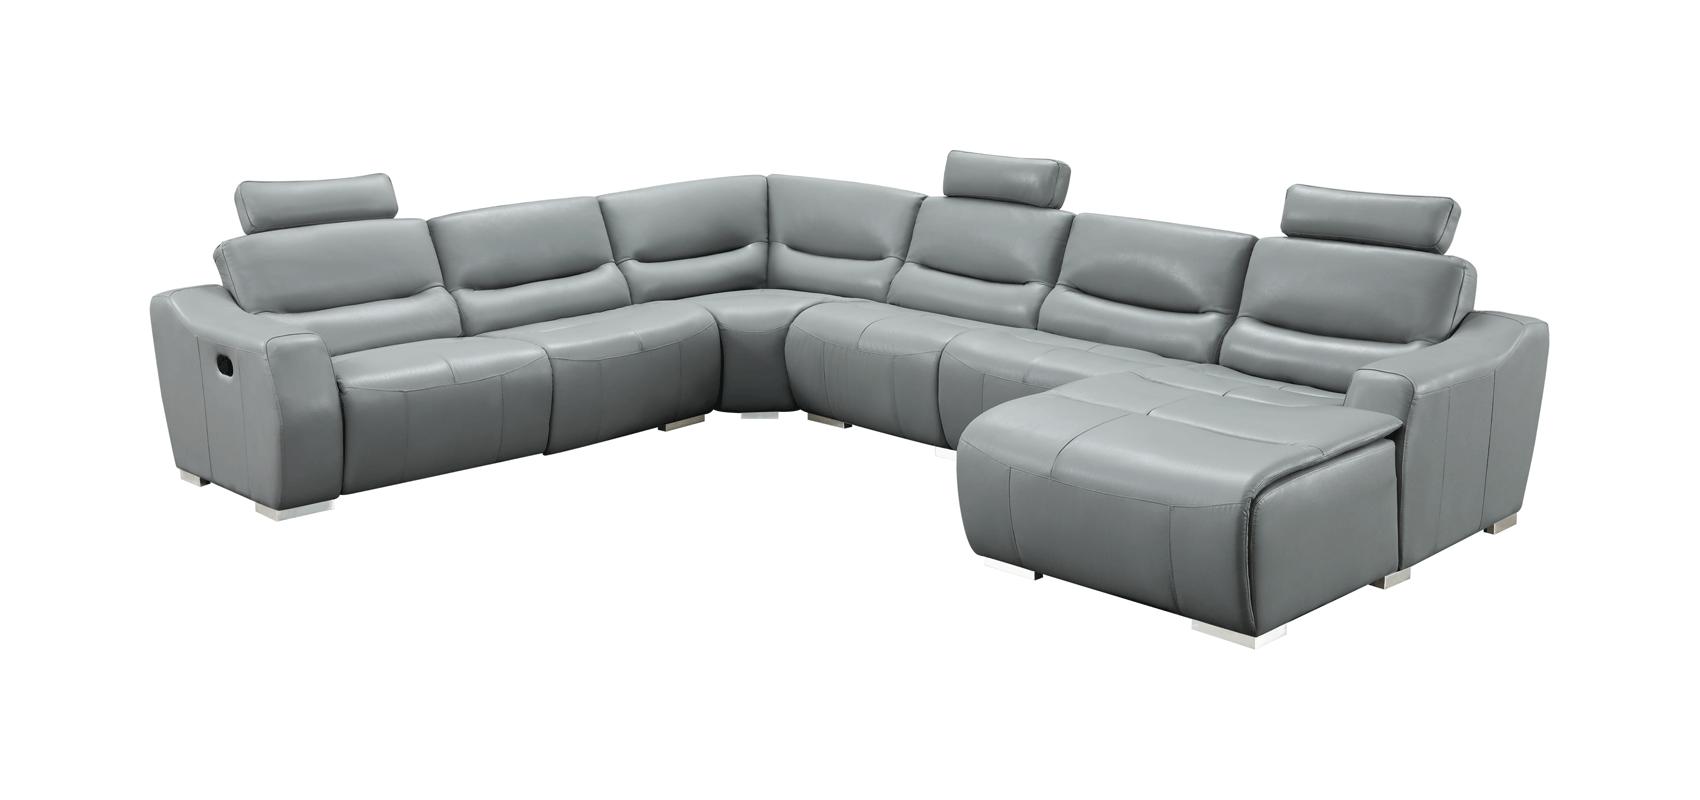 

    
ESF 2144 Sectional Reclining Sectional Gray 2144SECTIONALGREY
